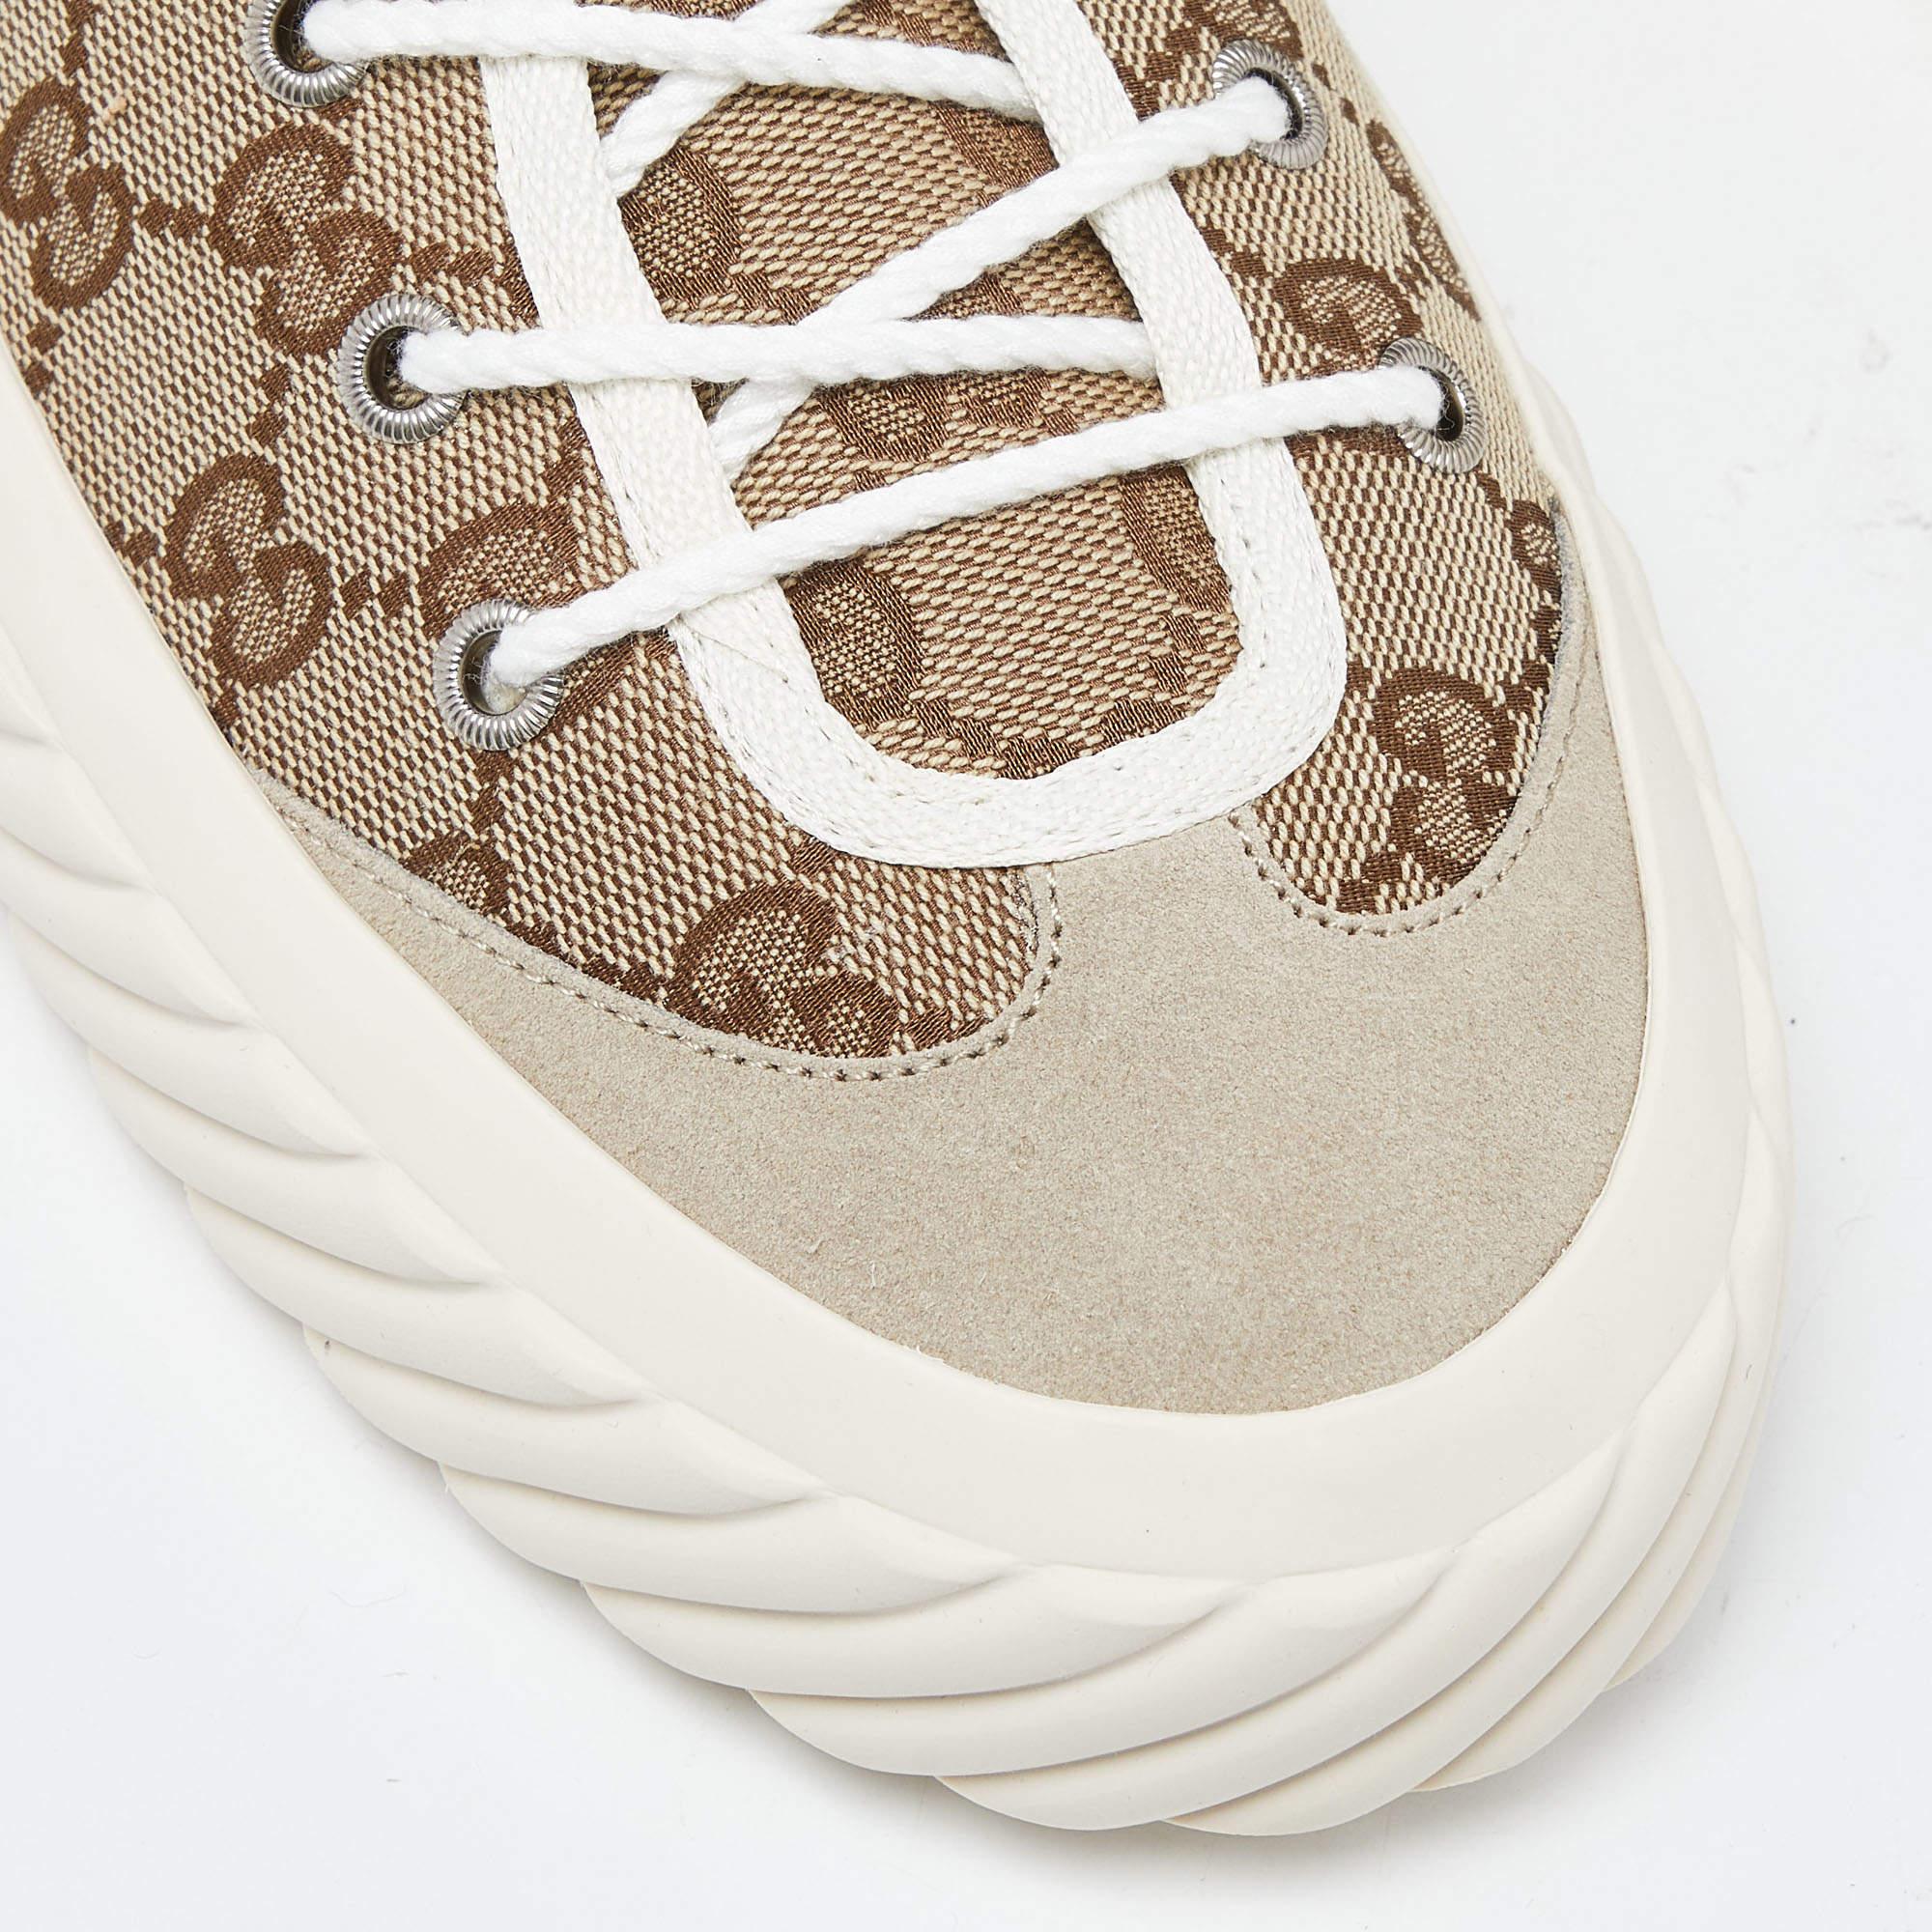 Gucci Gucci Brown/Beige GG Canvas and Suede Sneakers Size 43.5 For Sale 6